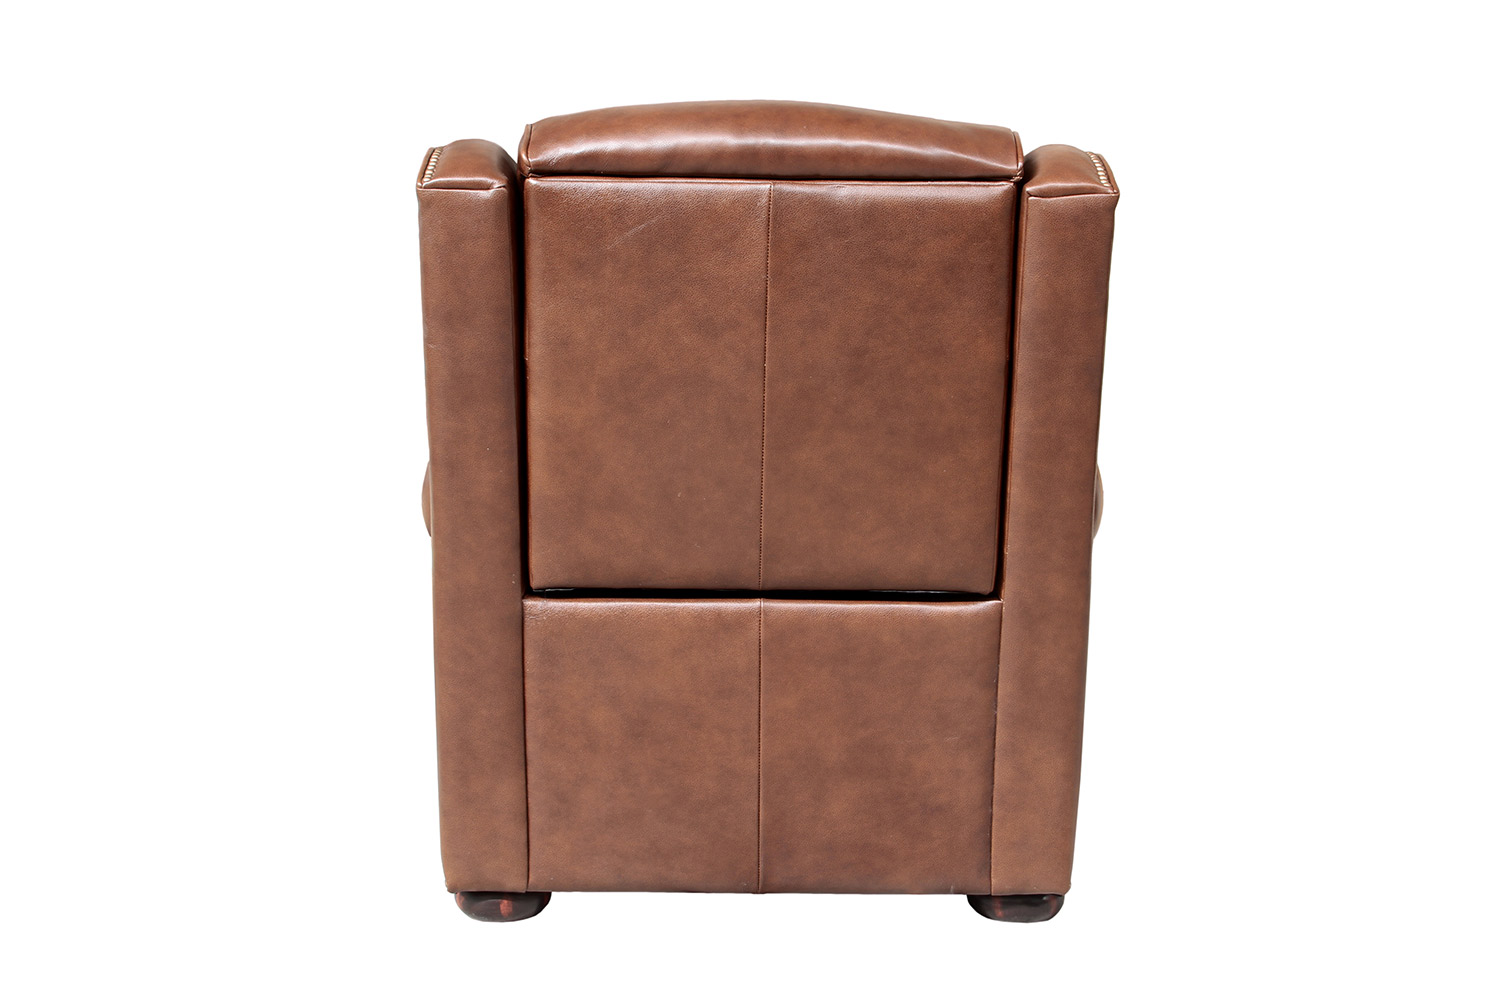 Barcalounger Benwick Power Recliner Chair with Power Head Rest - Shoreham Chocolate/All Leather